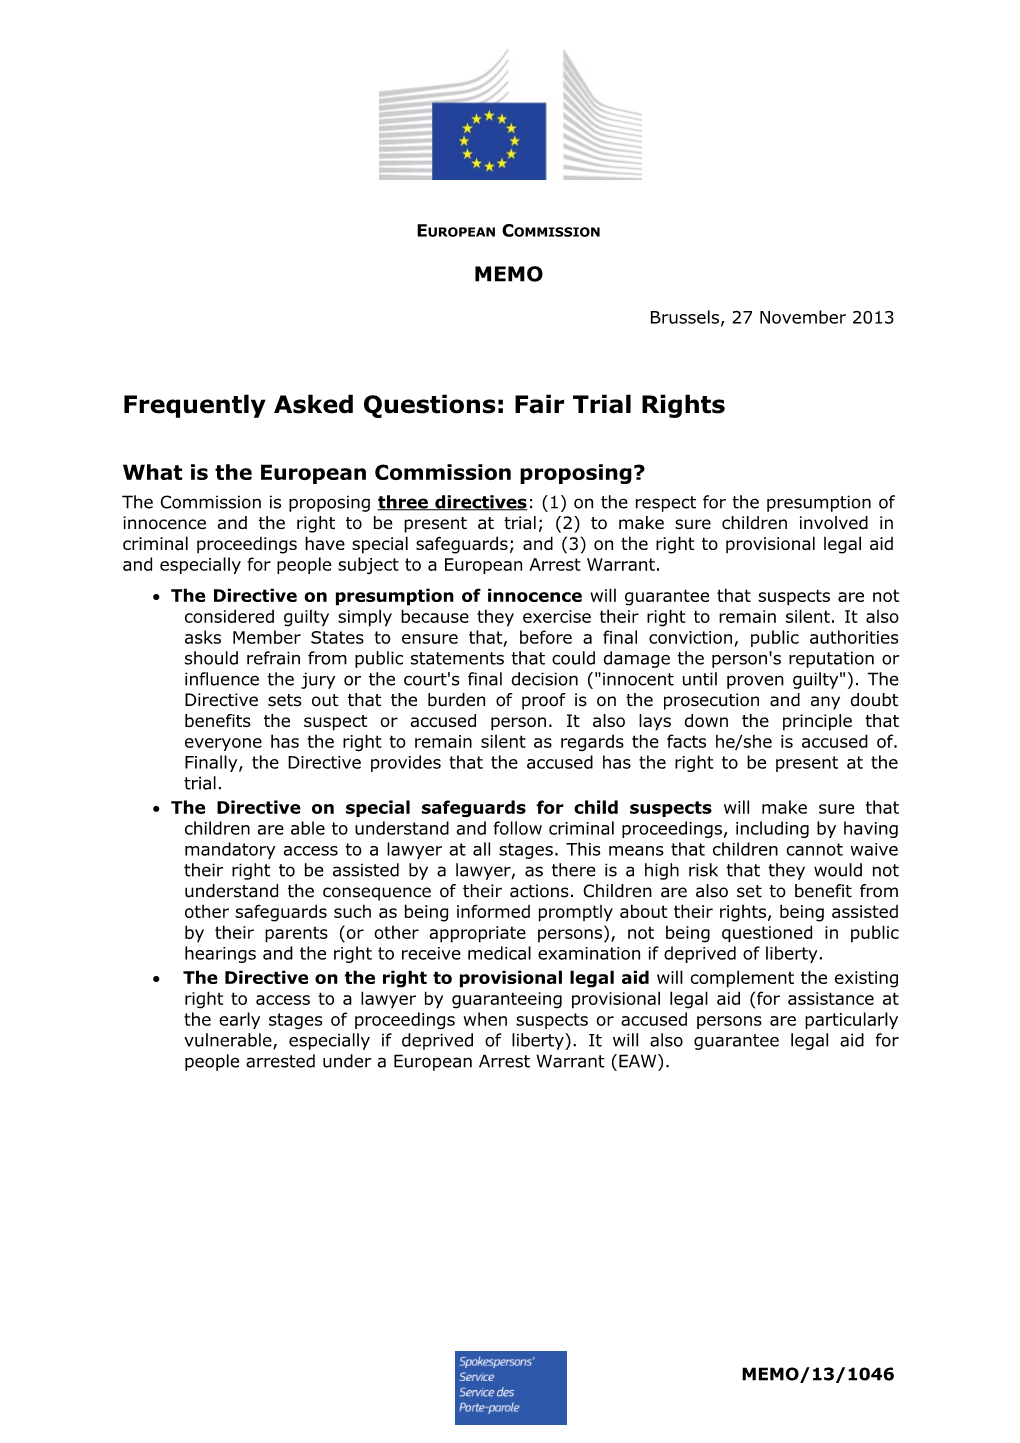 Frequently Asked Questions: Fair Trial Rights